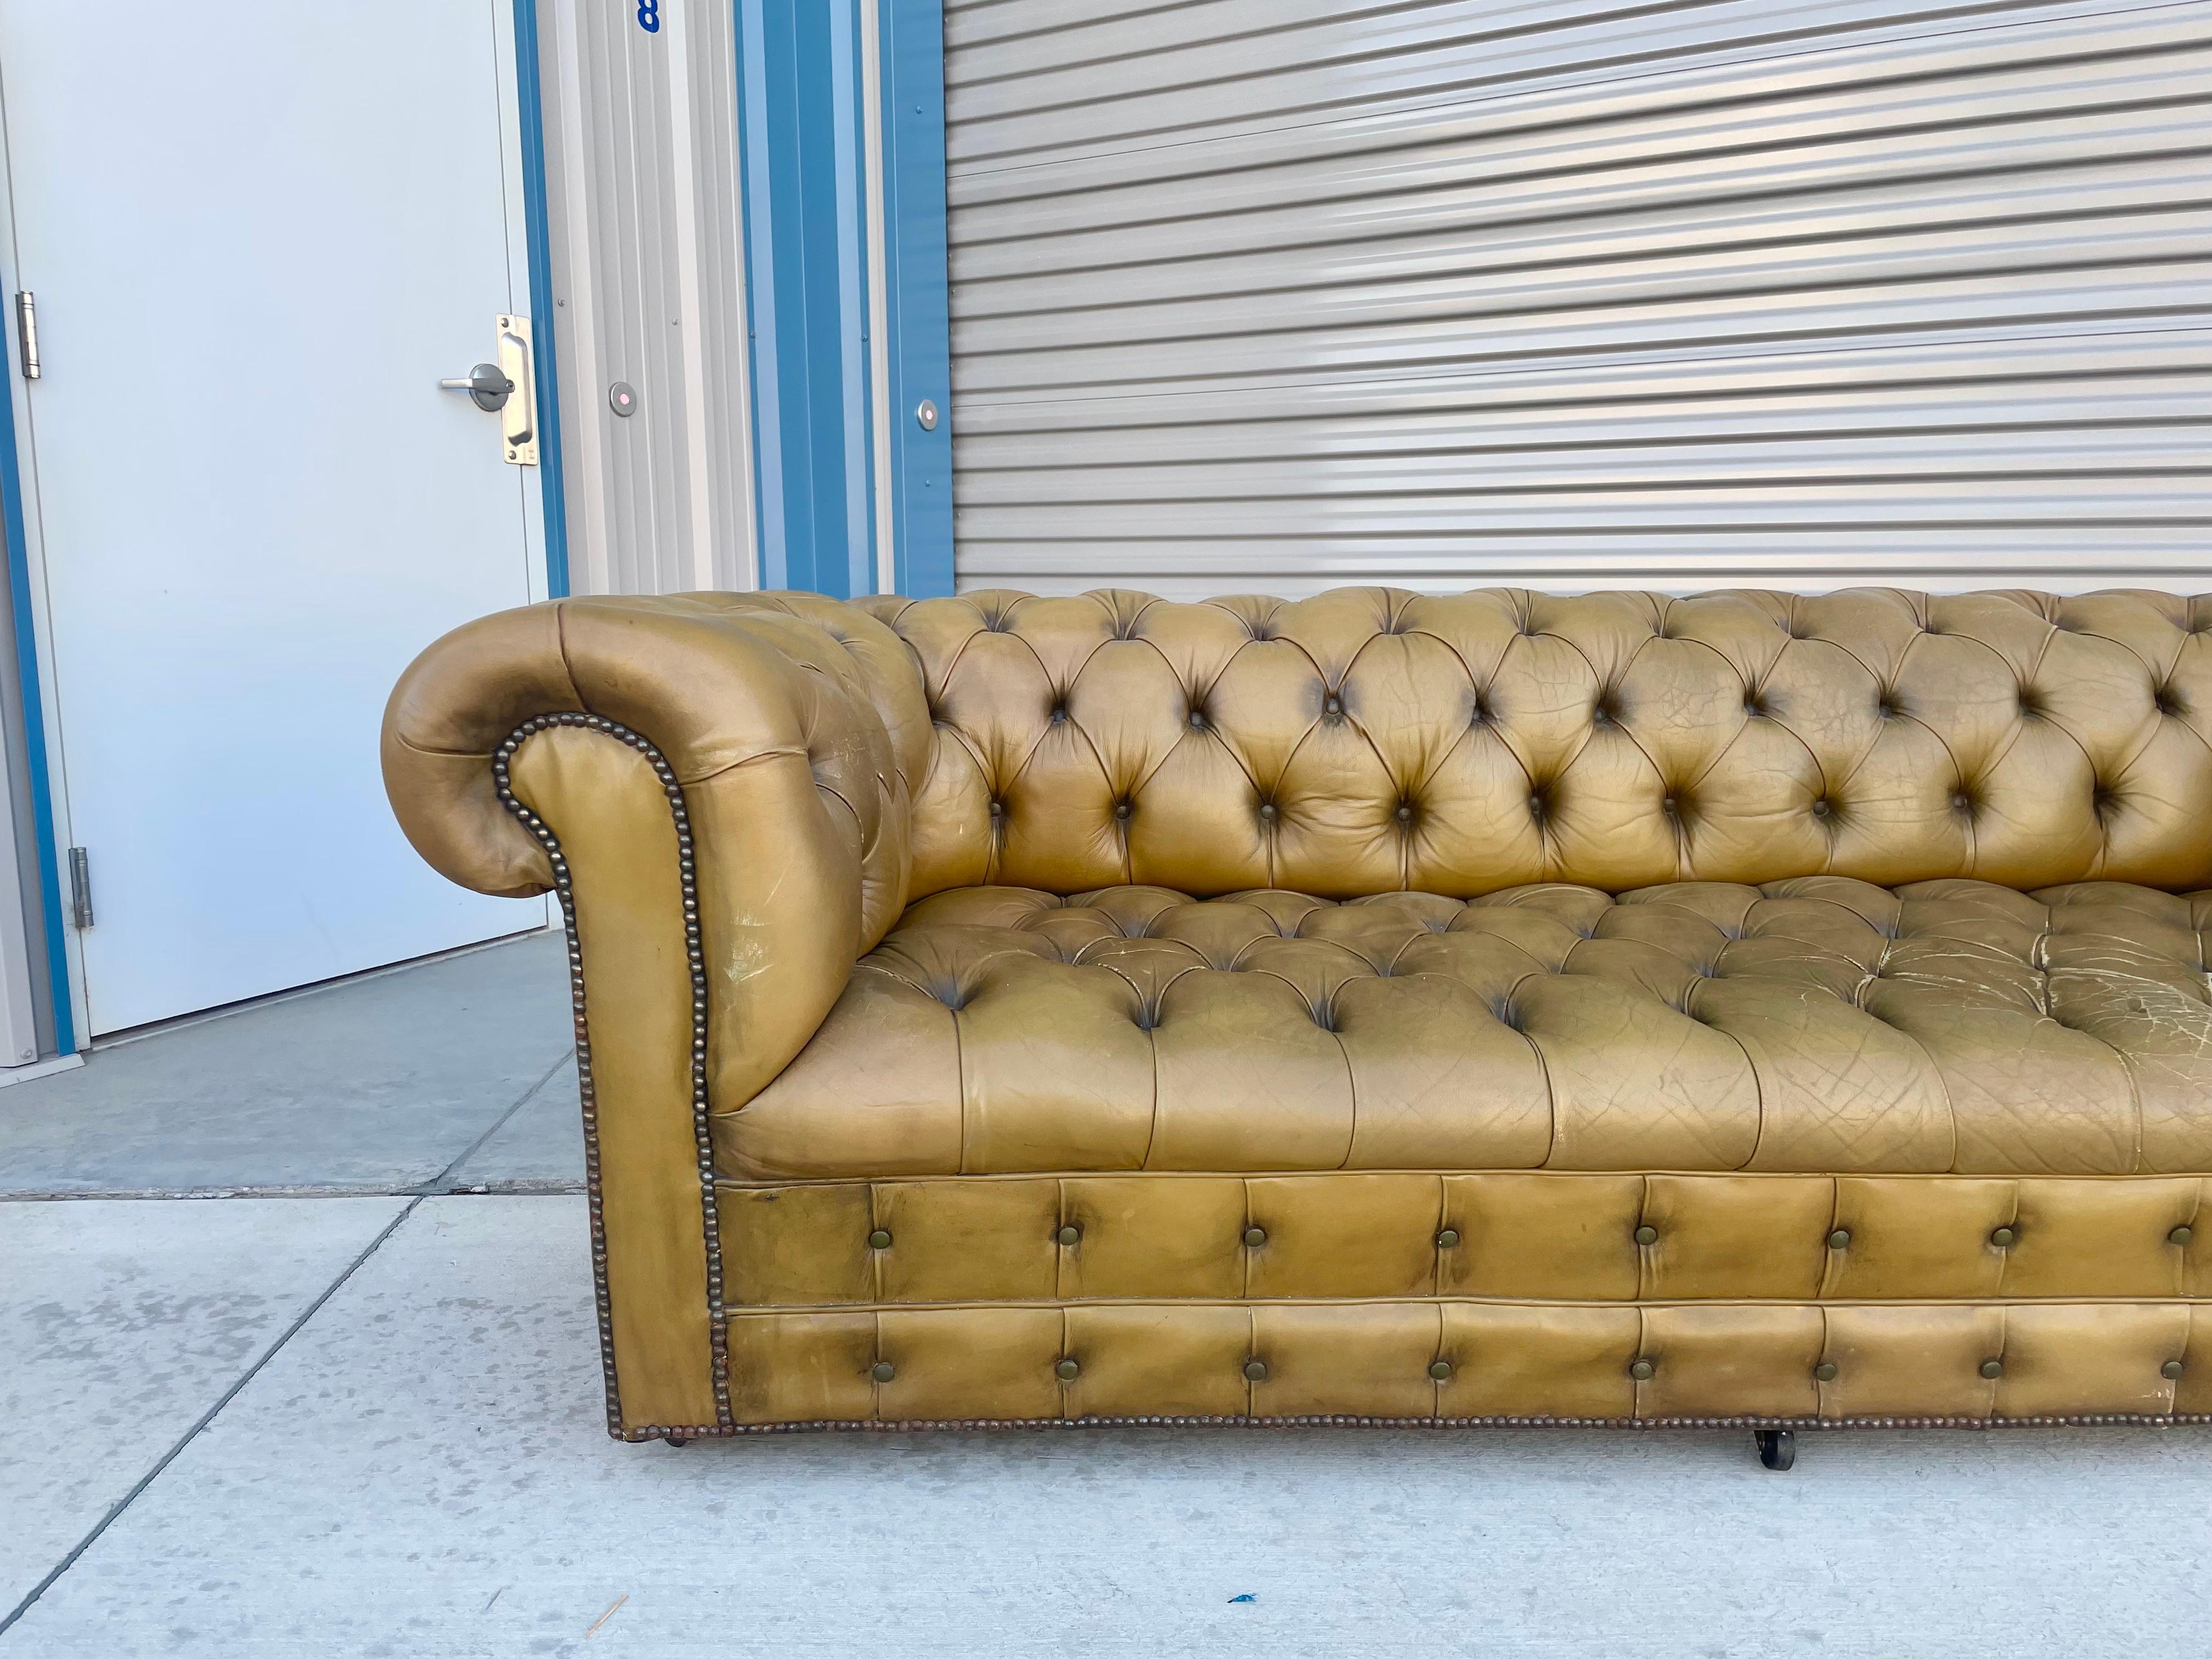 1960s Vintage Tufted Leather Sofa In Good Condition For Sale In North Hollywood, CA